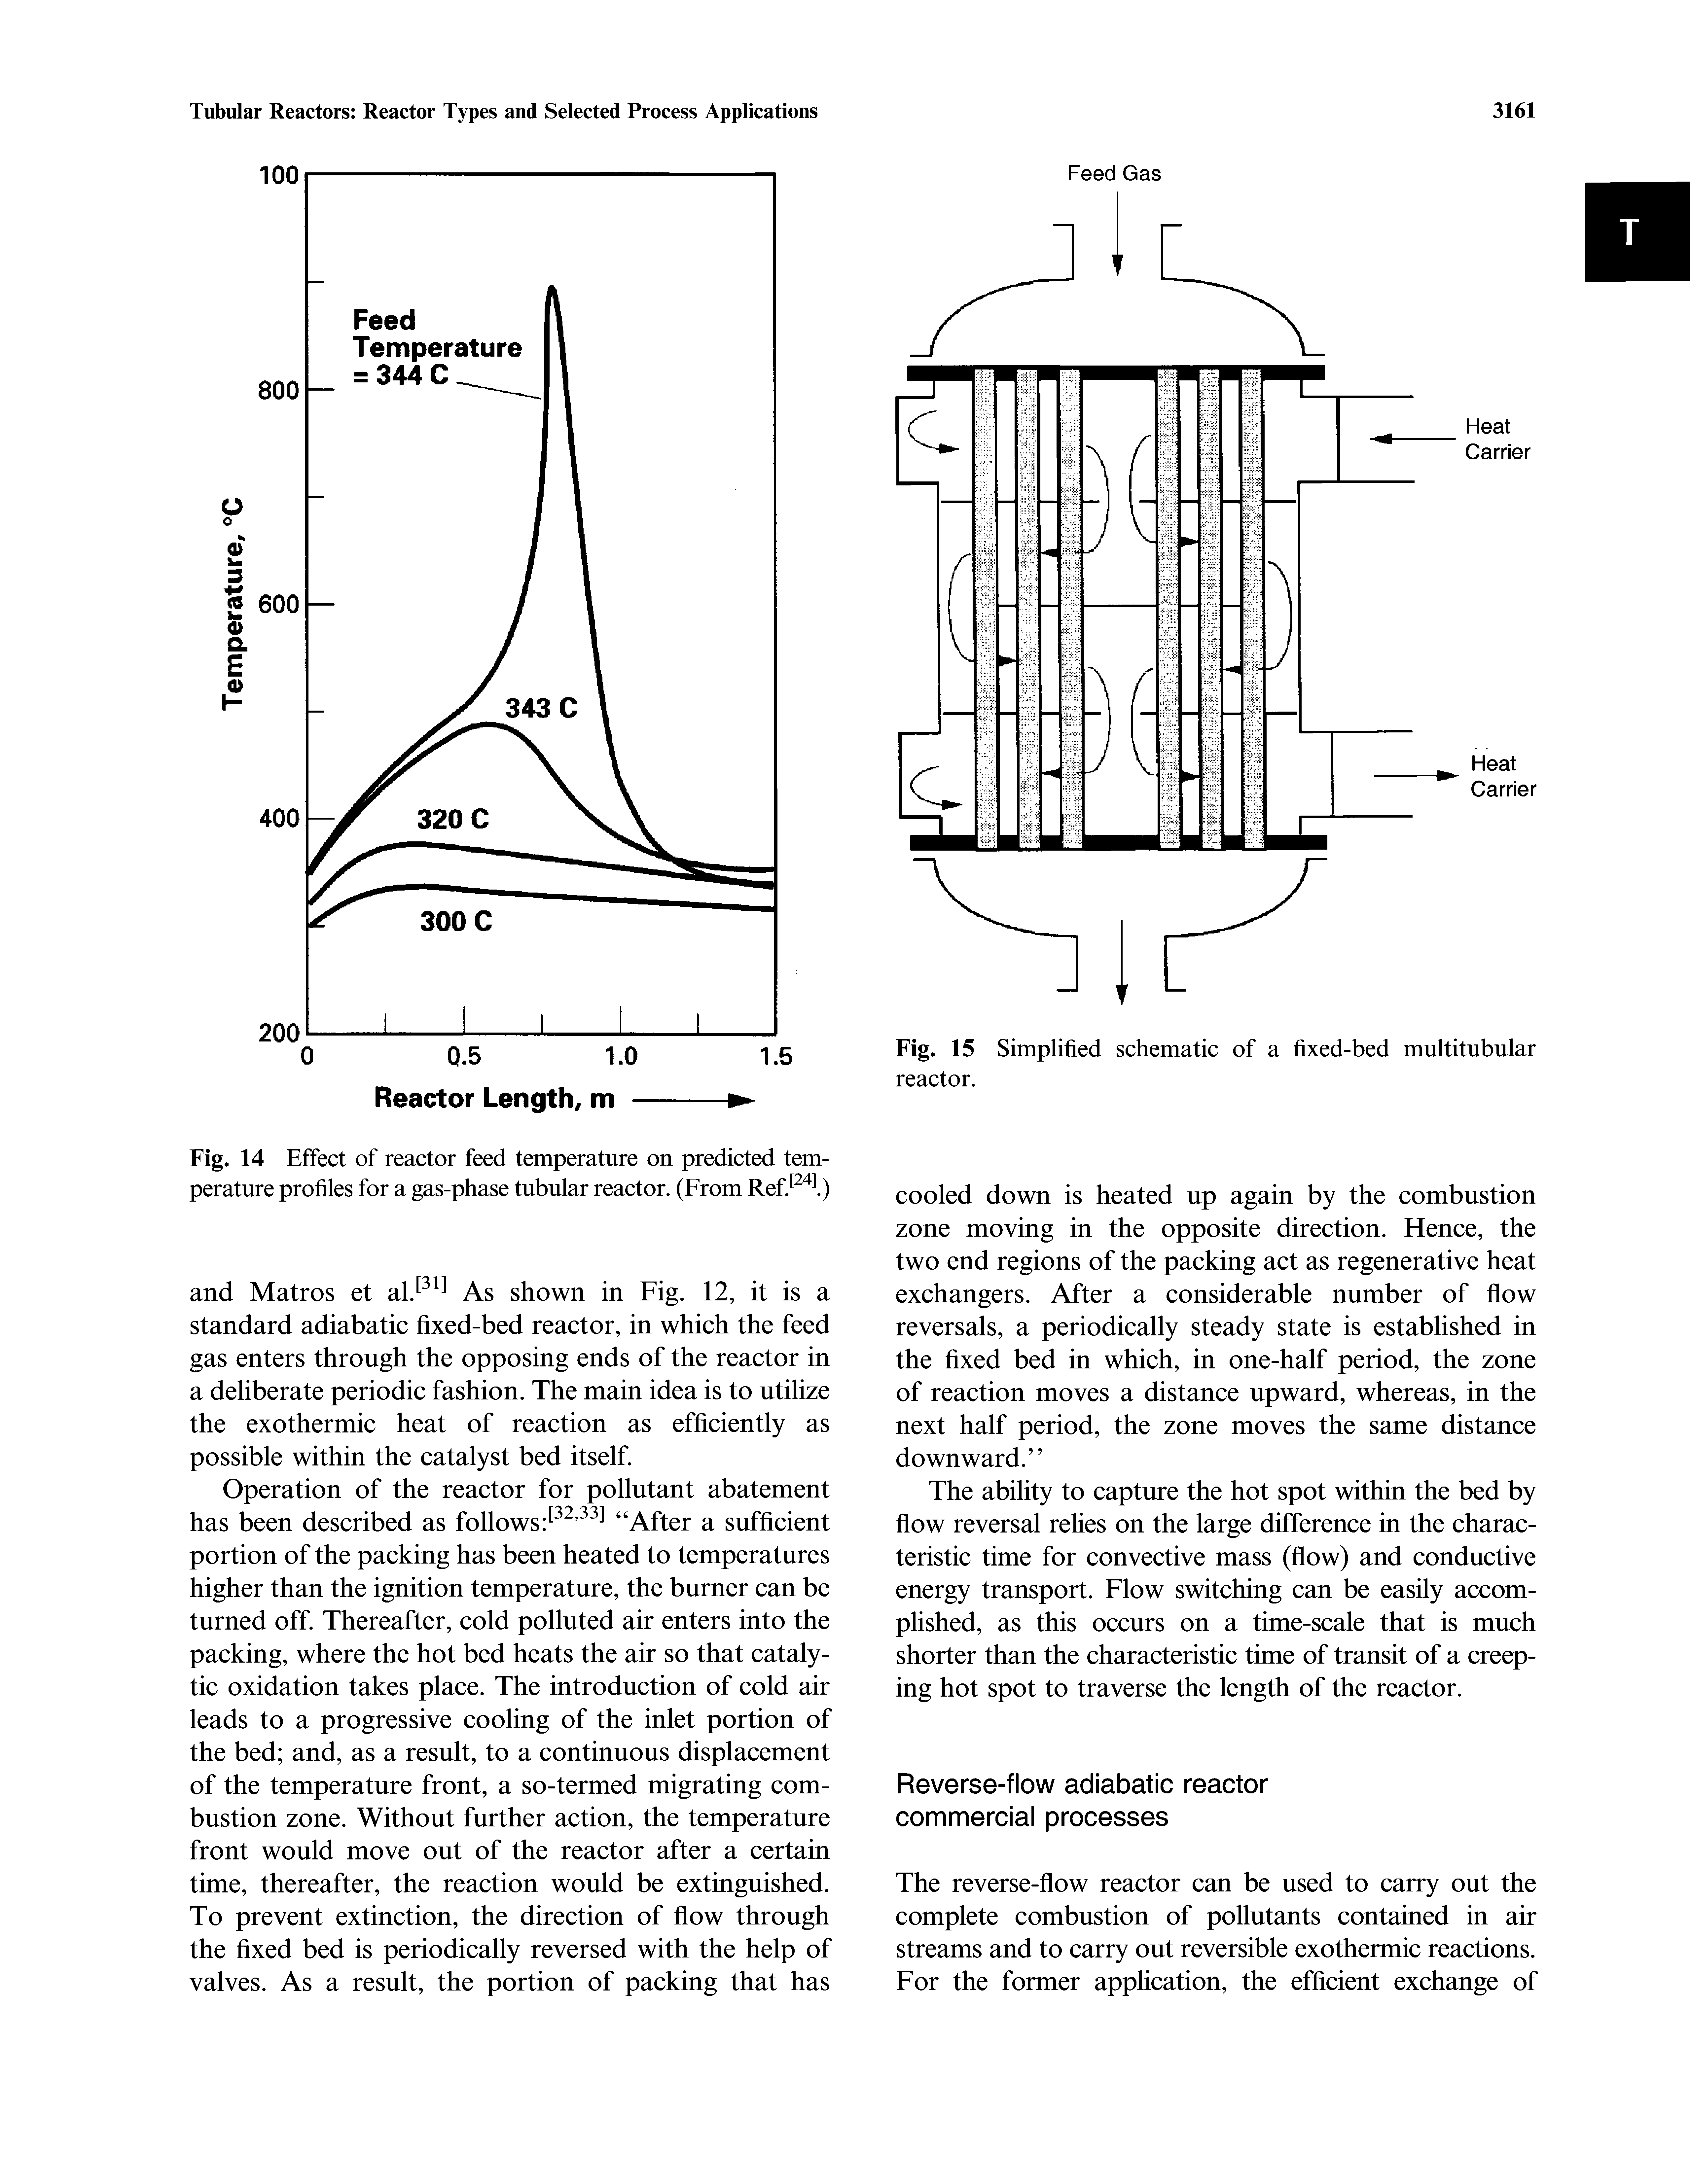 Fig. 14 Effect of reactor feed temperature on predicted temperature profiles for a gas-phase tubular reactor. (From Ref. " l)...